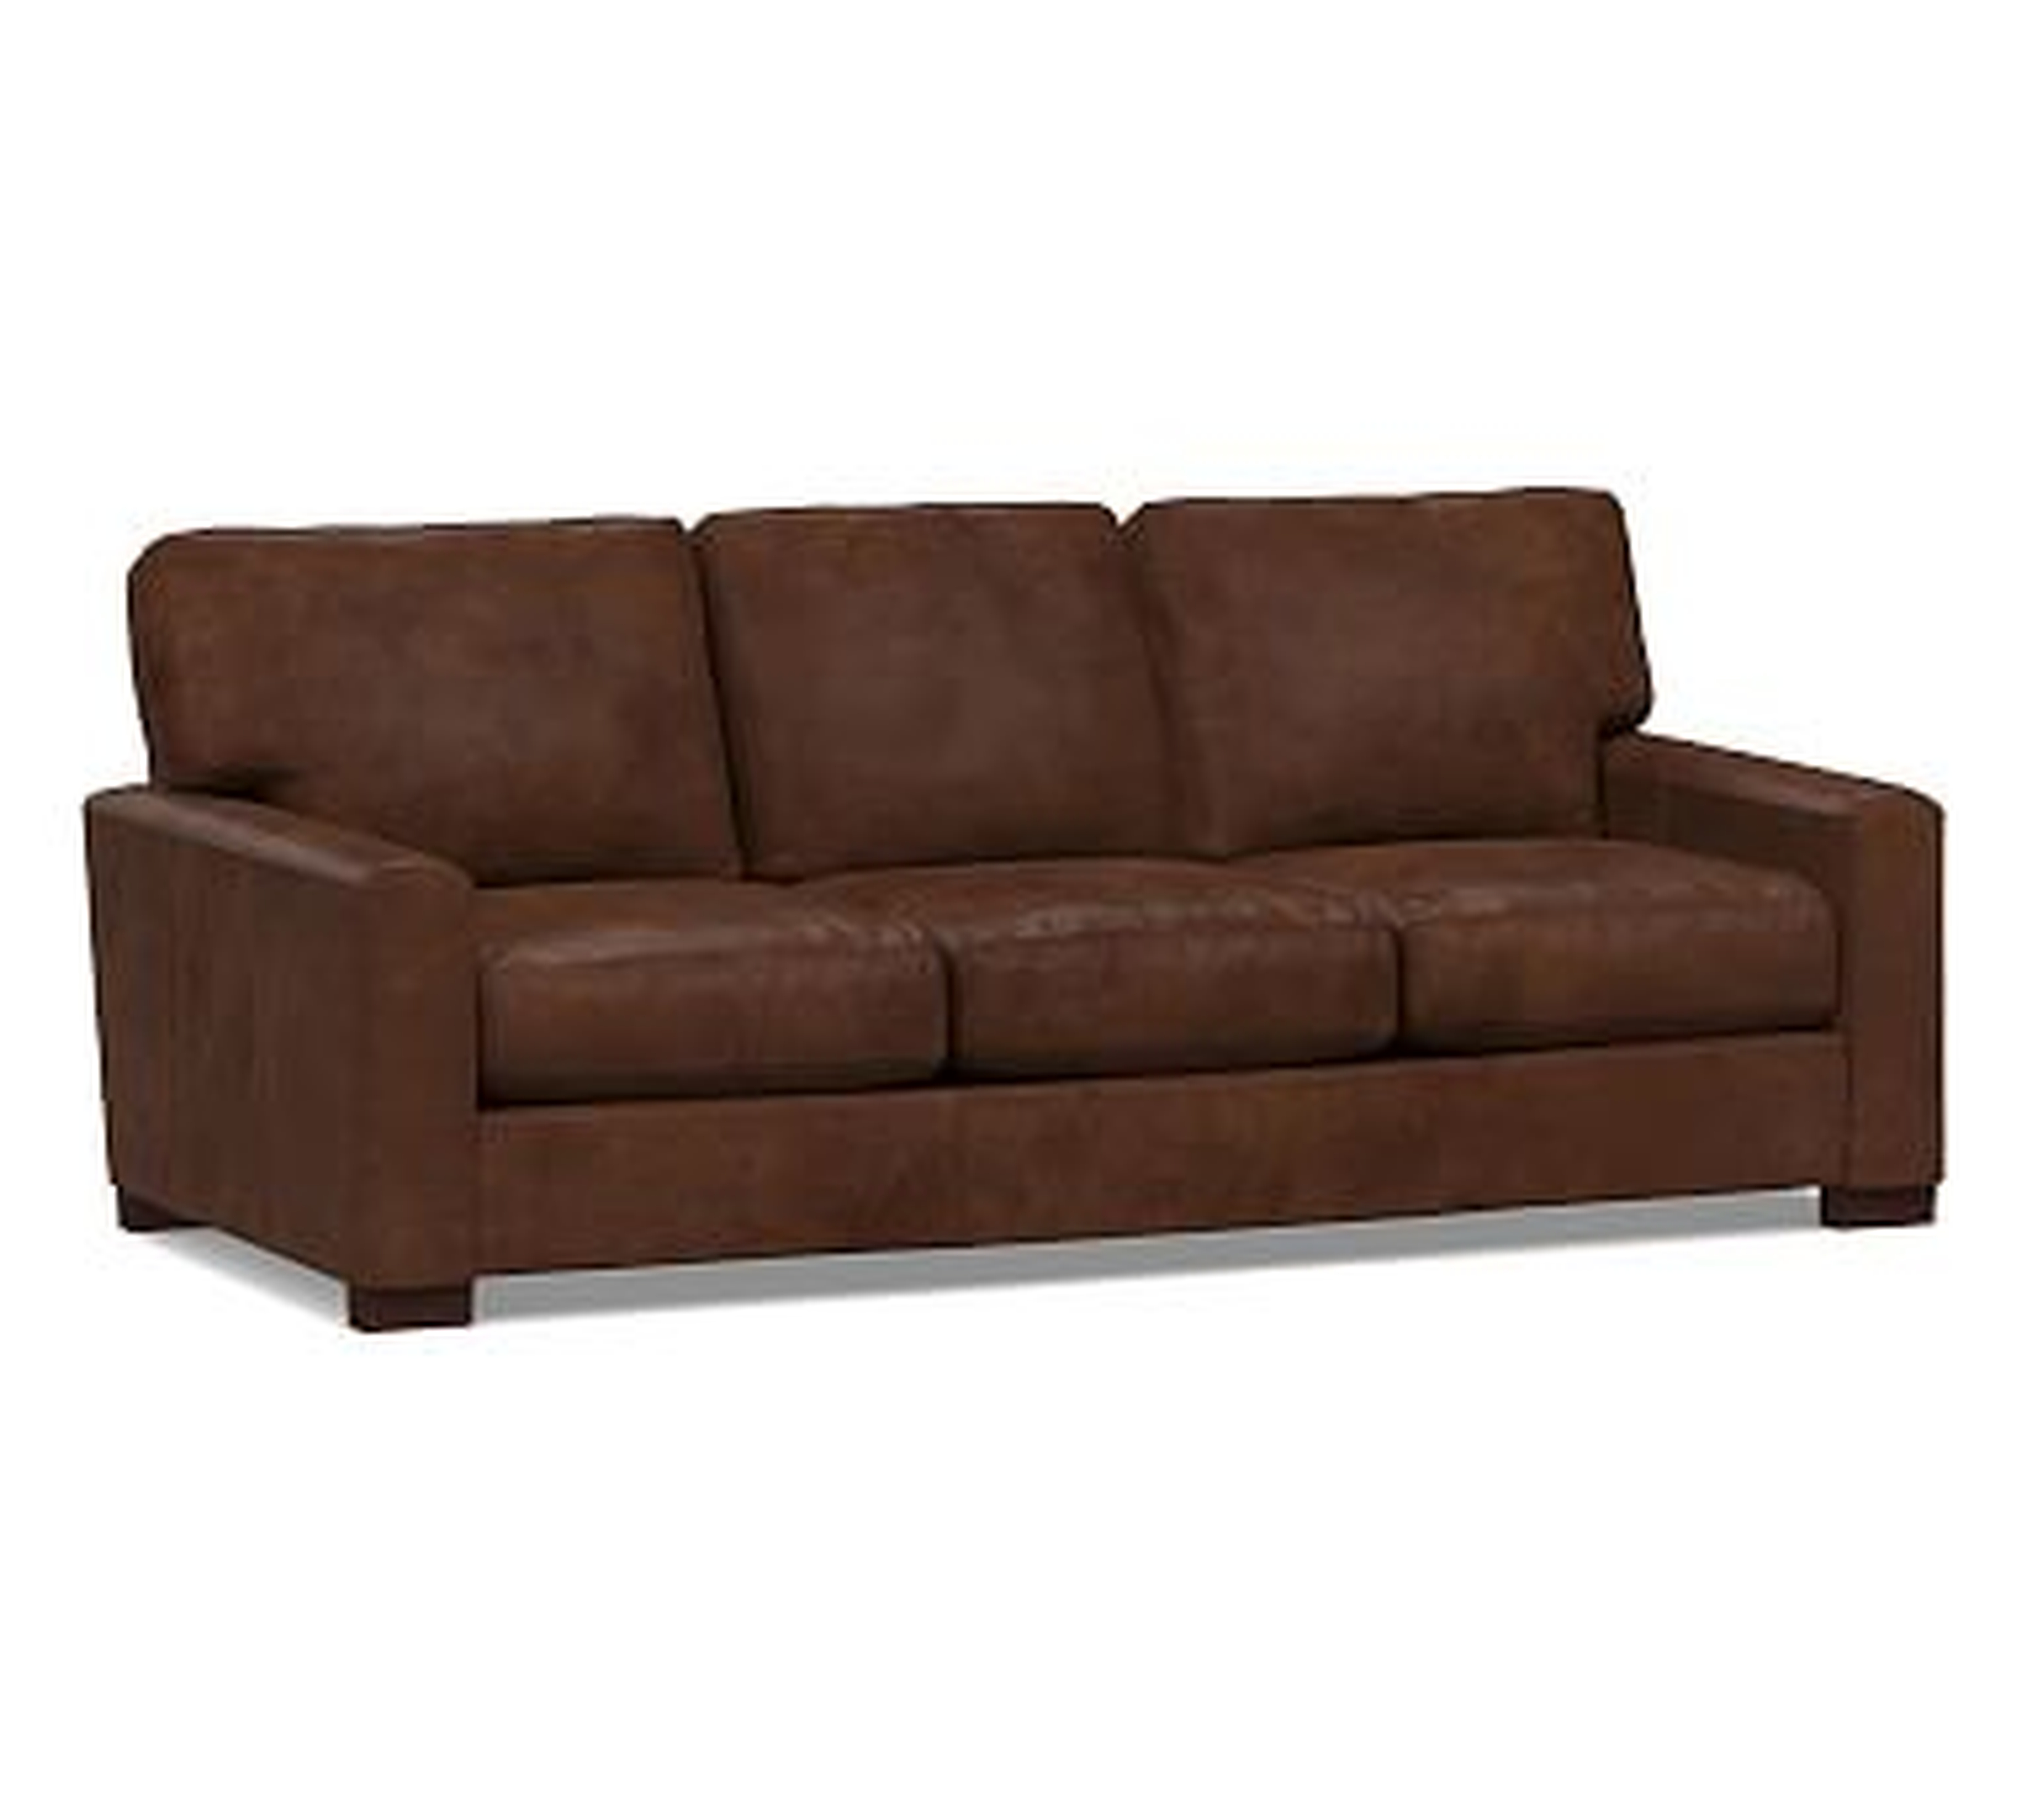 Turner Square Arm Leather Sofa 3-Seater 85.5", Down Blend Wrapped Cushions, Vegan Java - Pottery Barn